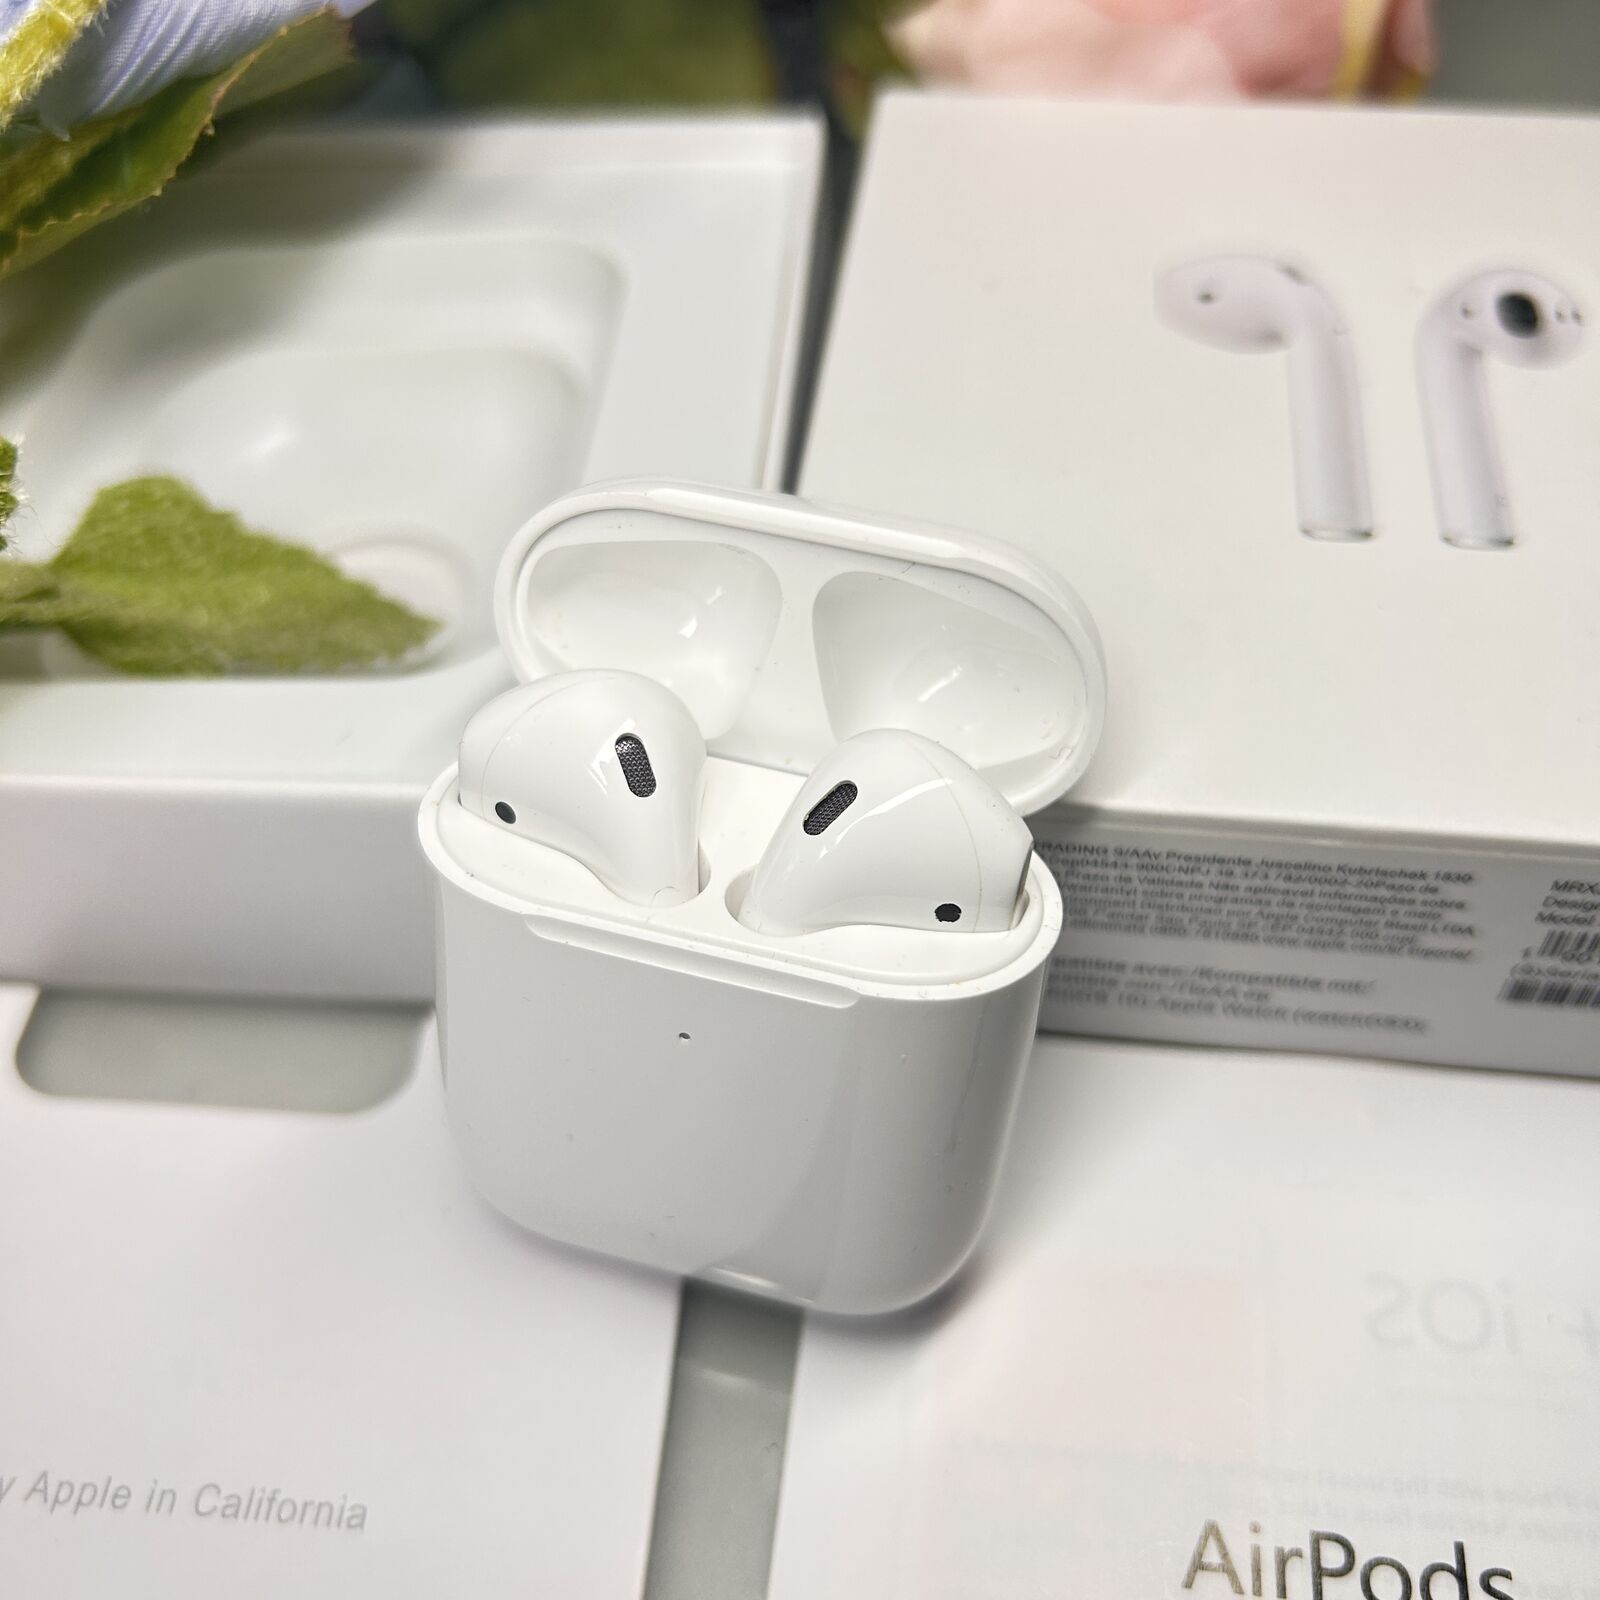 Apple AirPods 2nd Generation with Charging Case, White [MV7N2AM/A]